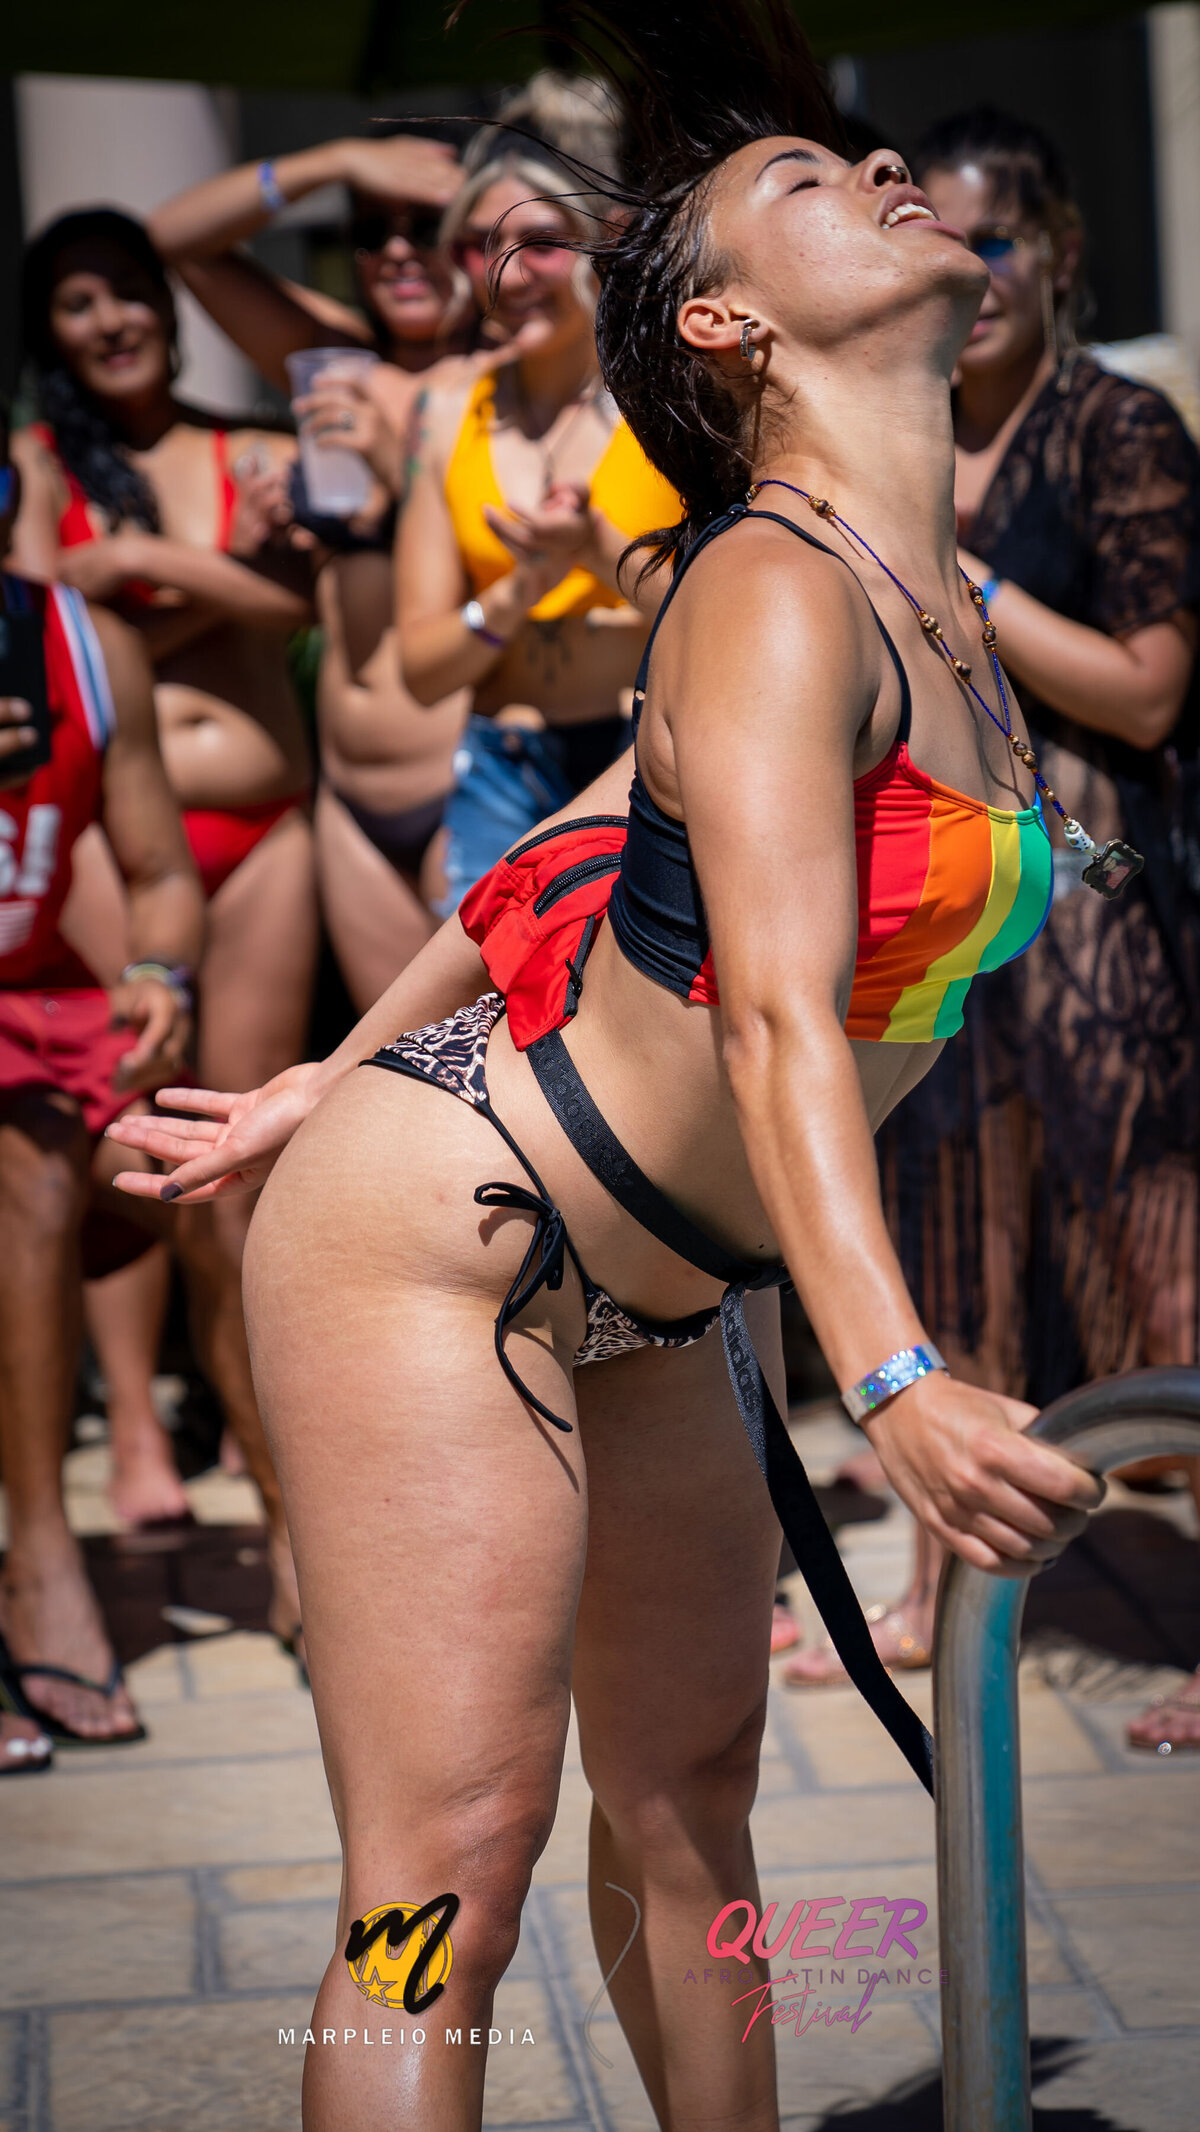 Queer-Afro-Latin-Dance-Festival-Pool-PartyNSM08772